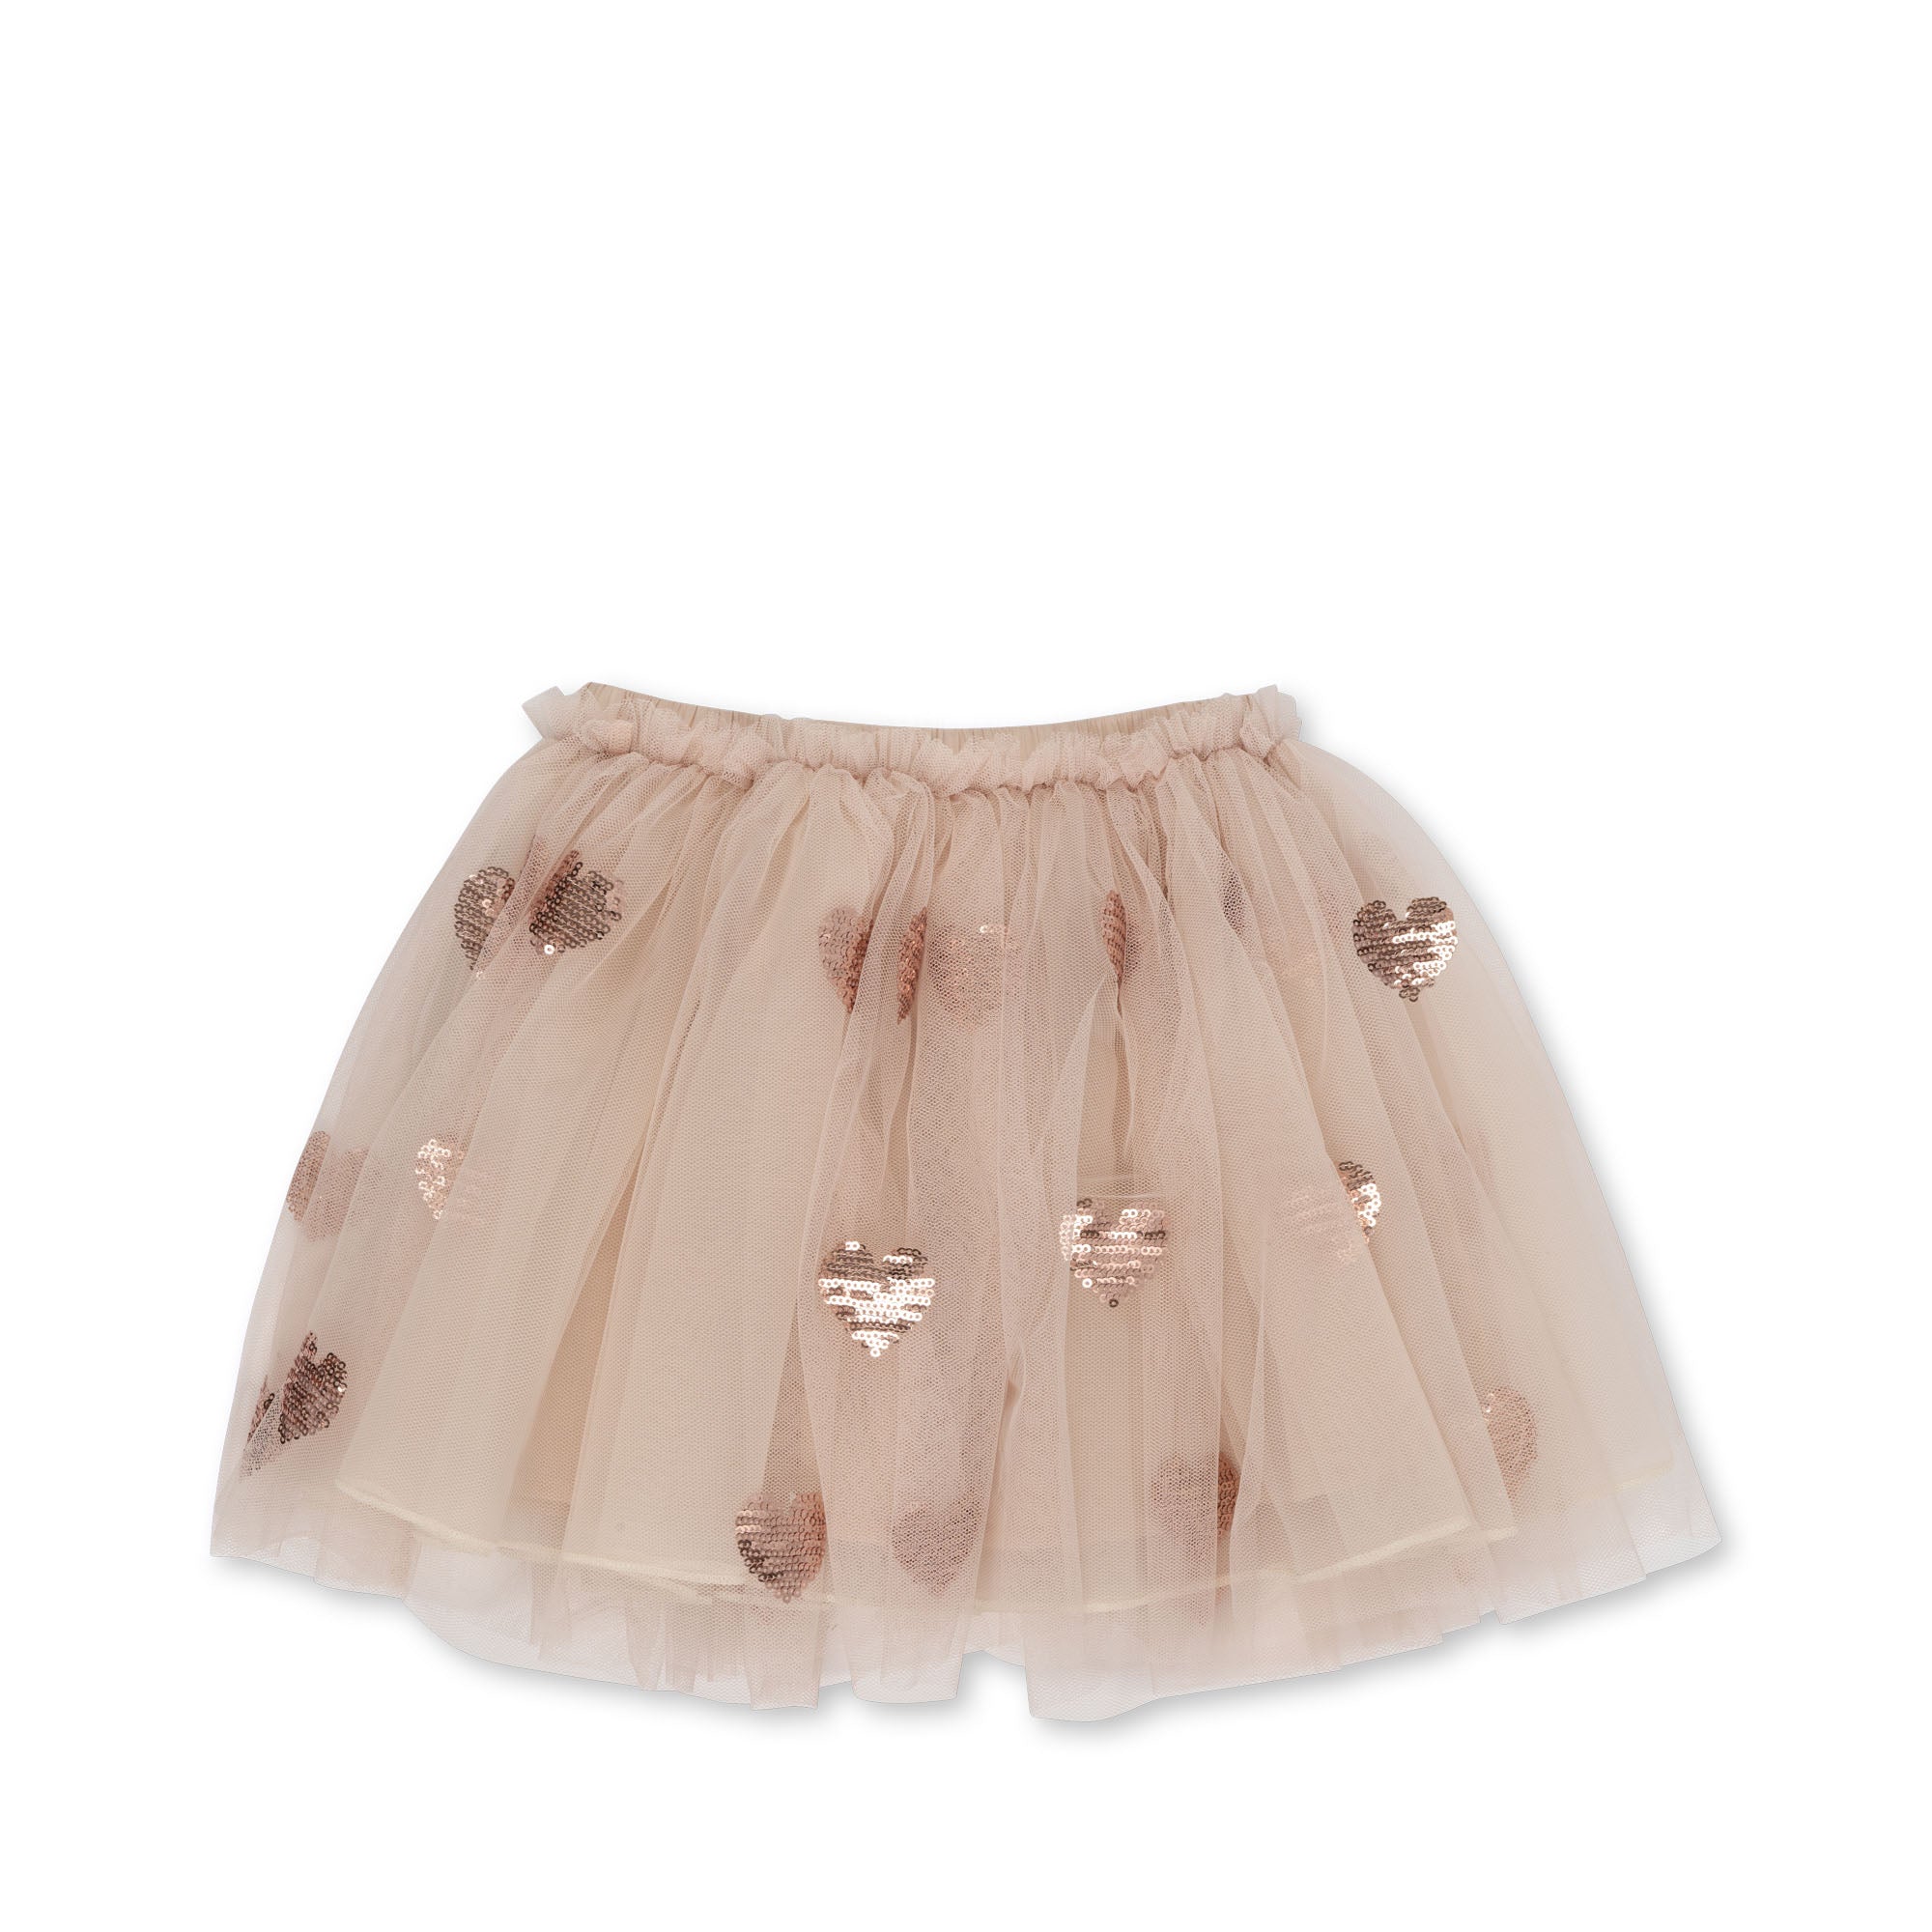 Konges Sløjd A/S YVONNE HEART SEQUINS SKIRT Dresses and skirts - Woven COEUR SEQUINS